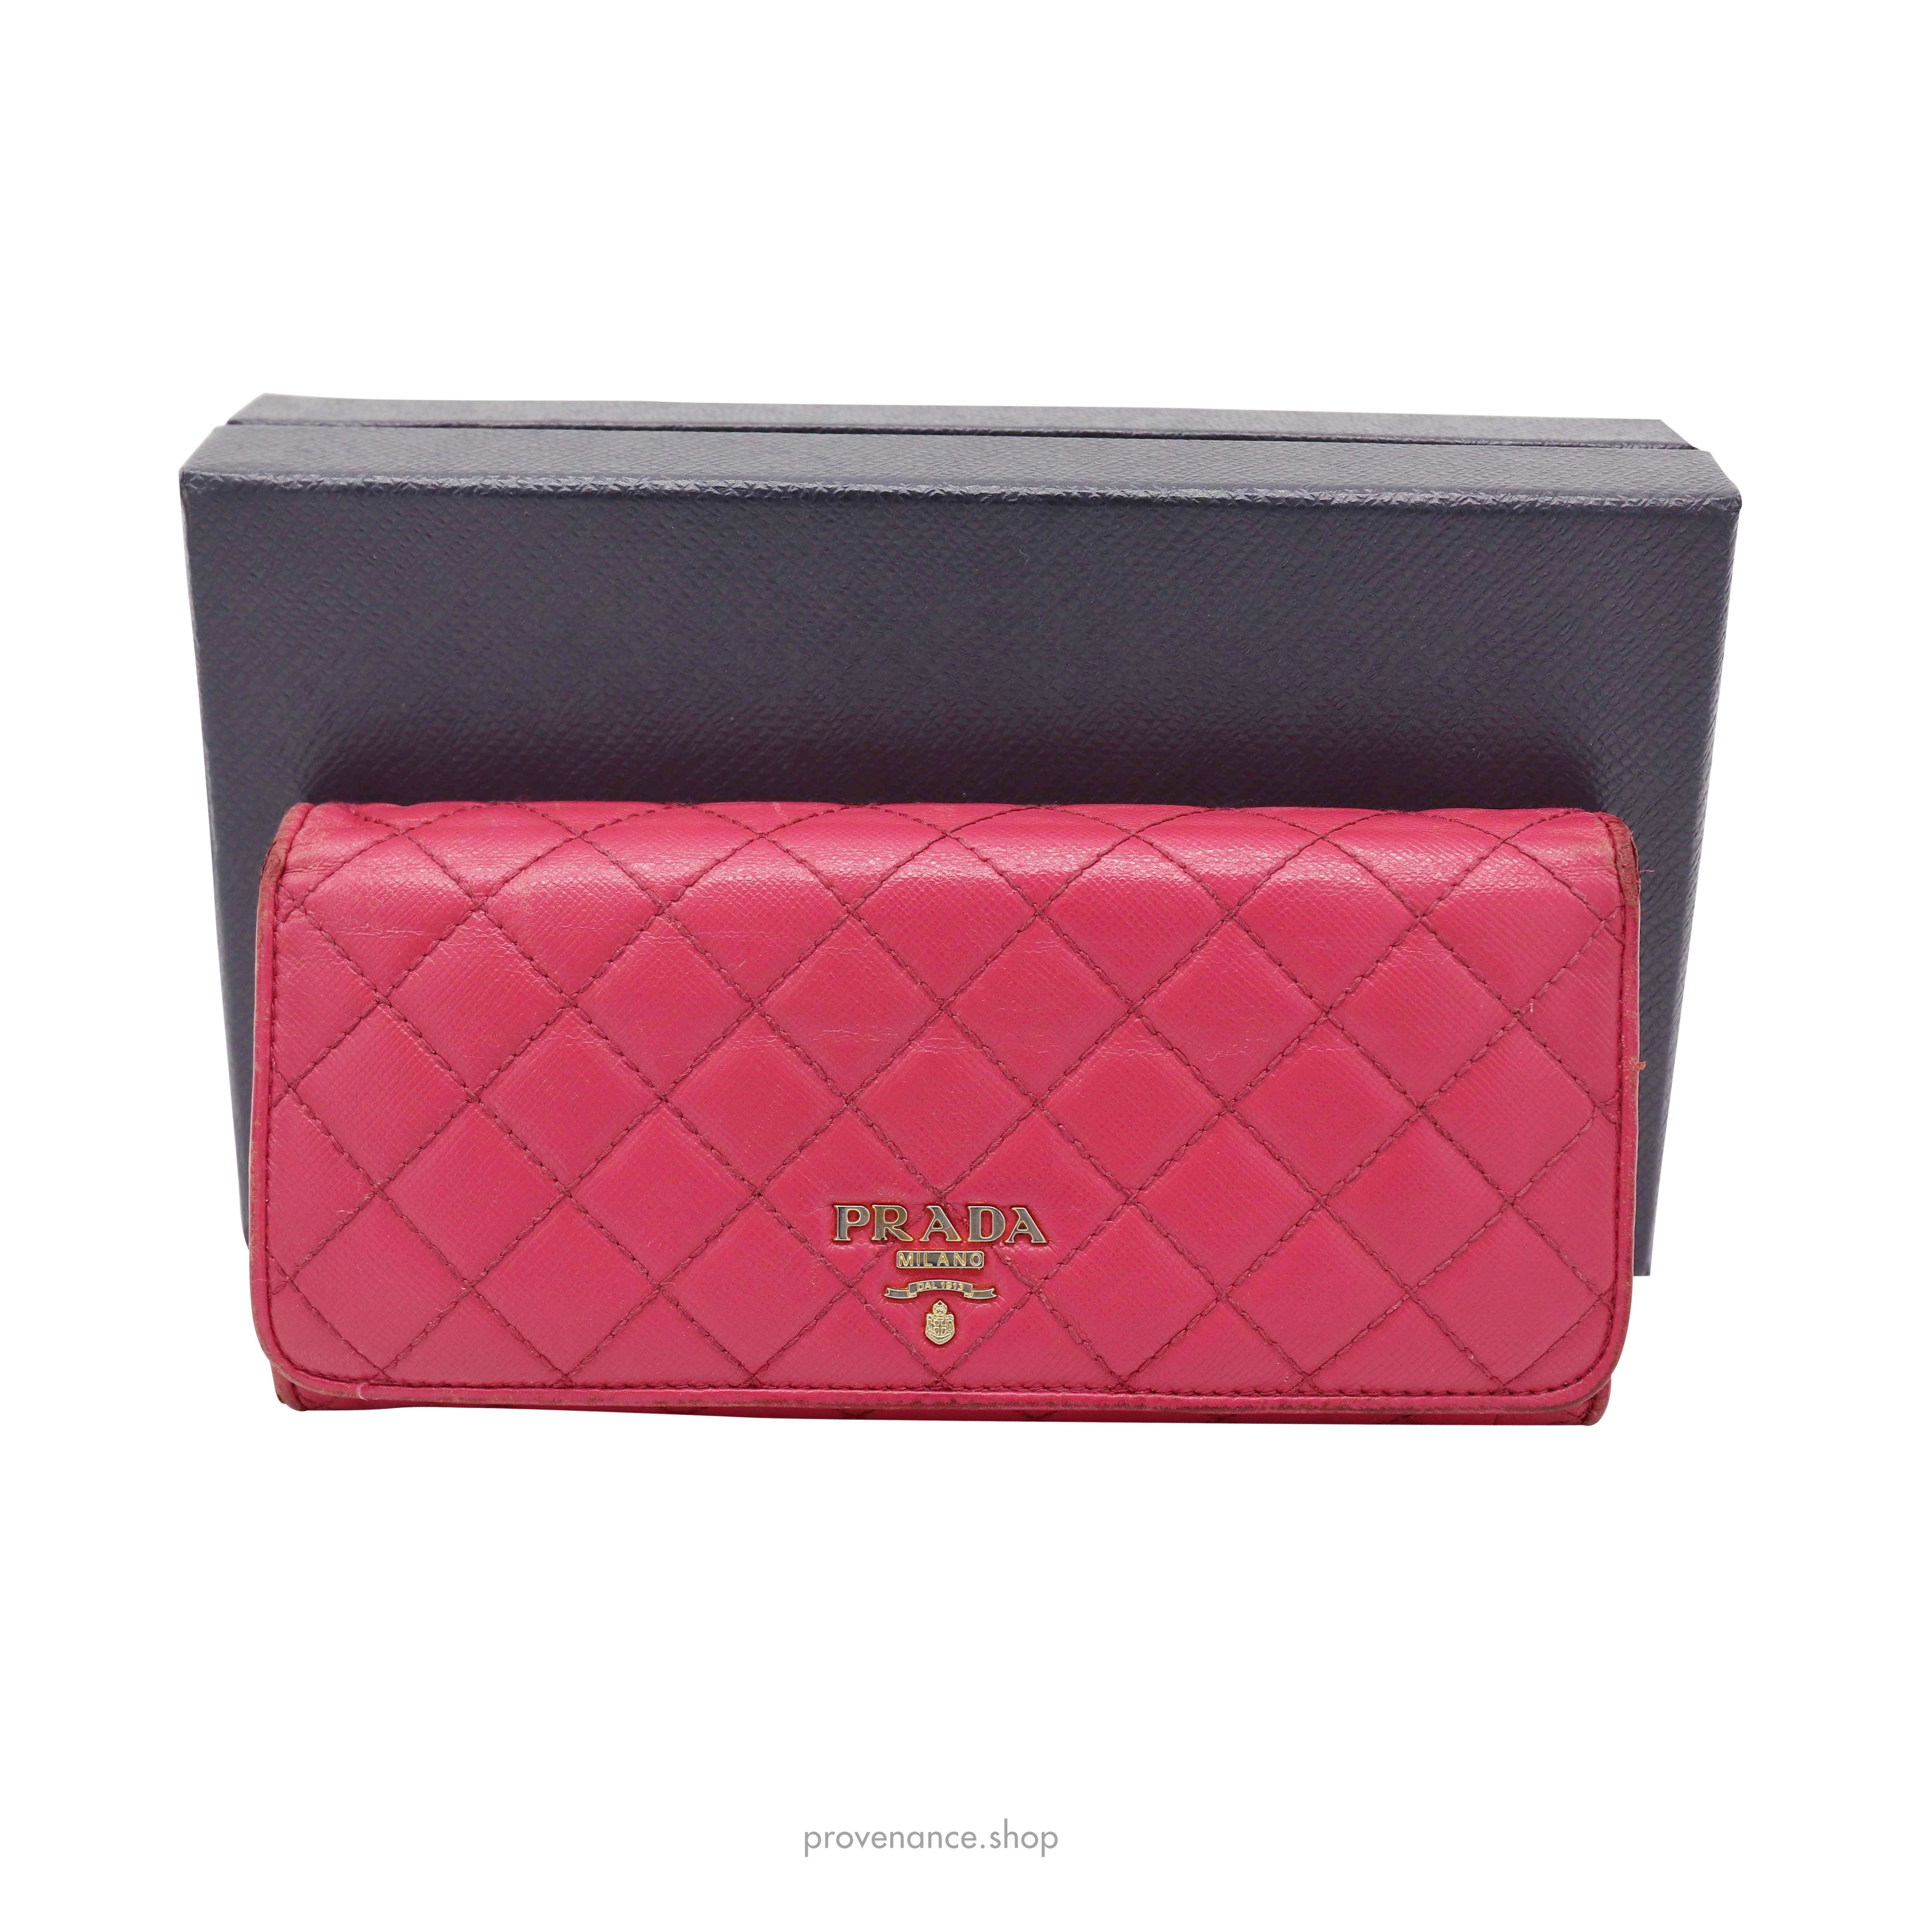 Prada Long Wallet - Pink Quilted Saffiano Leather - 1